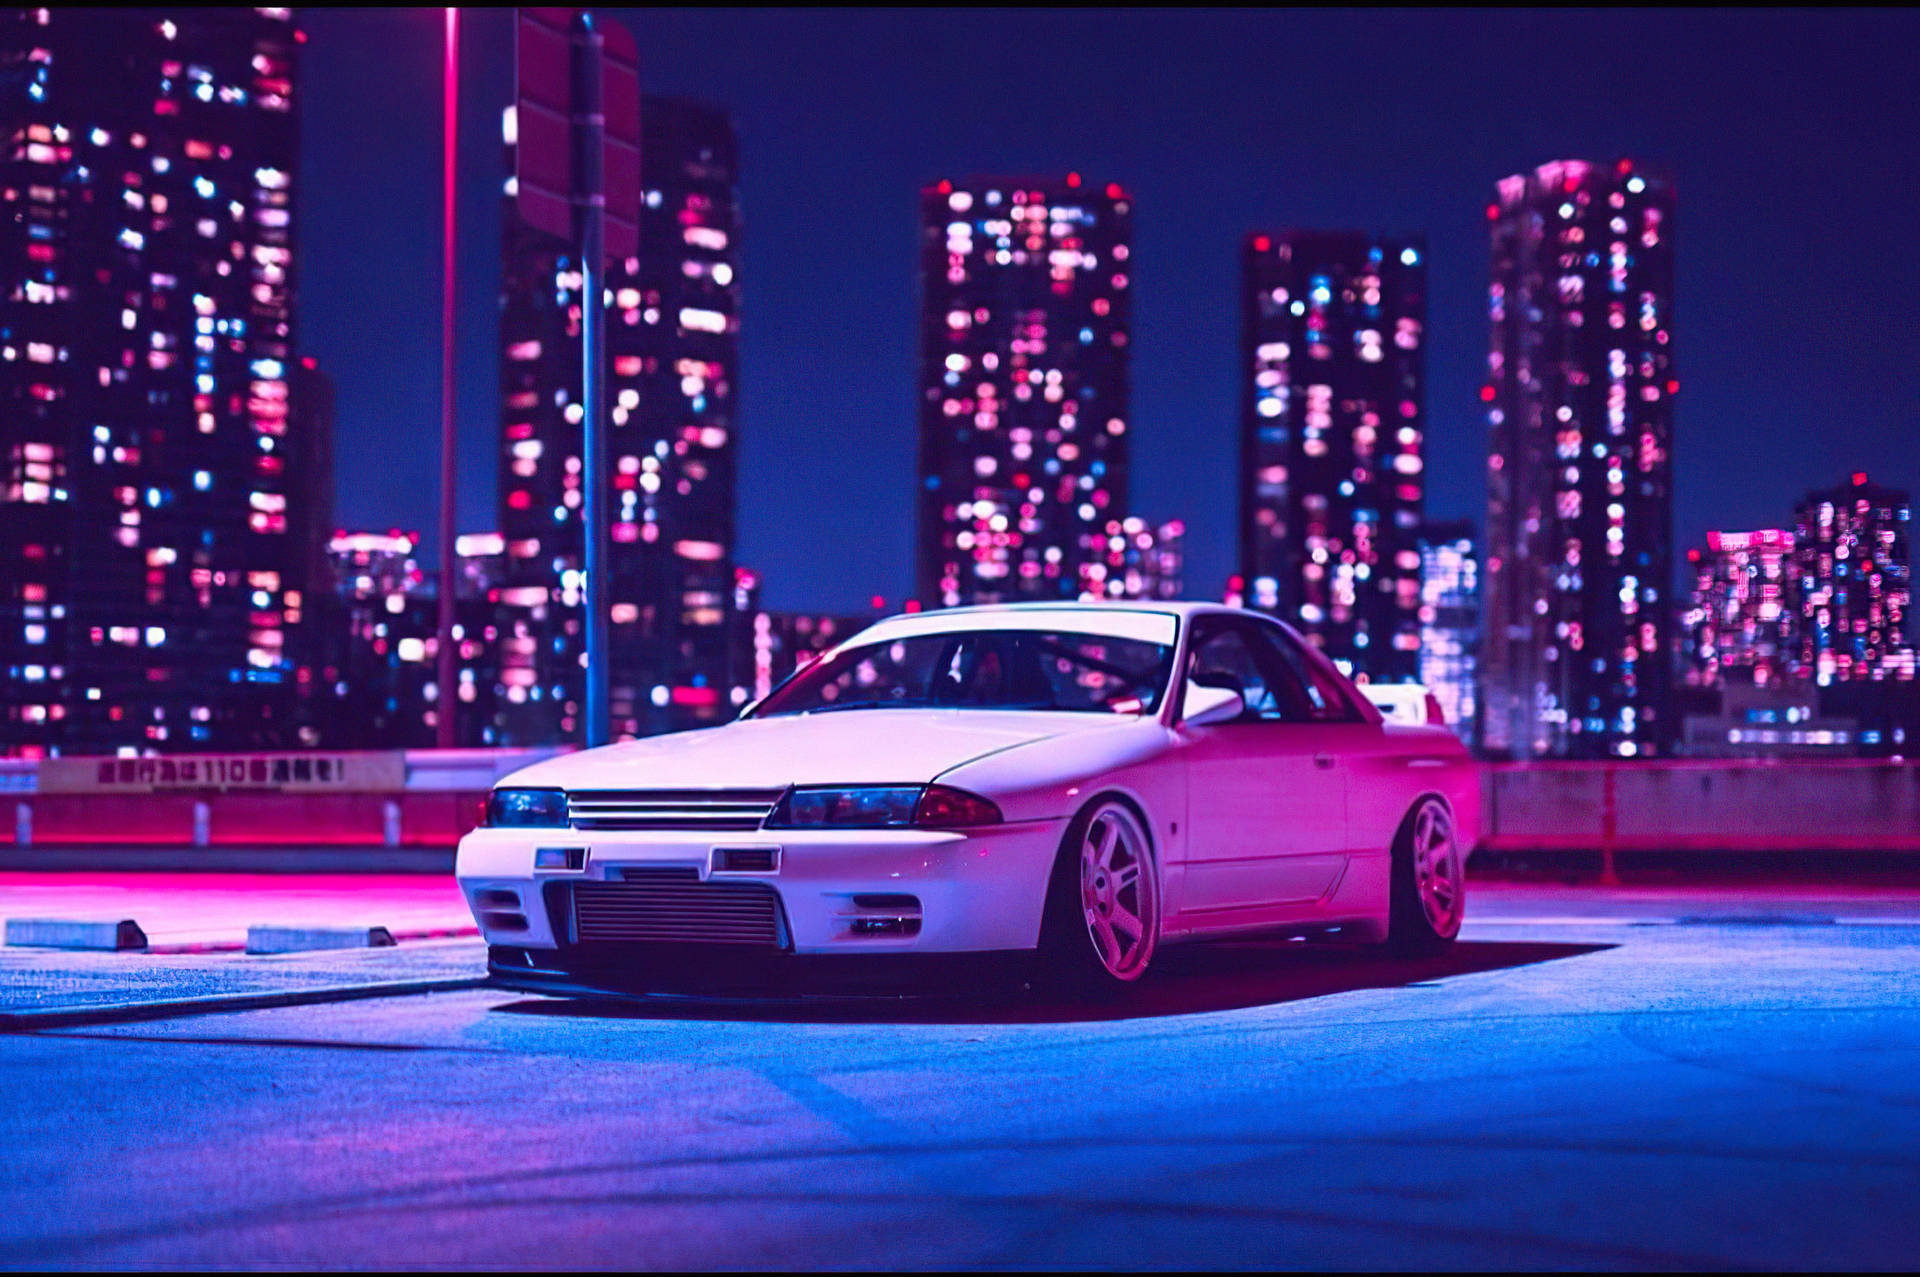 Parked Car And Neon Lights Background